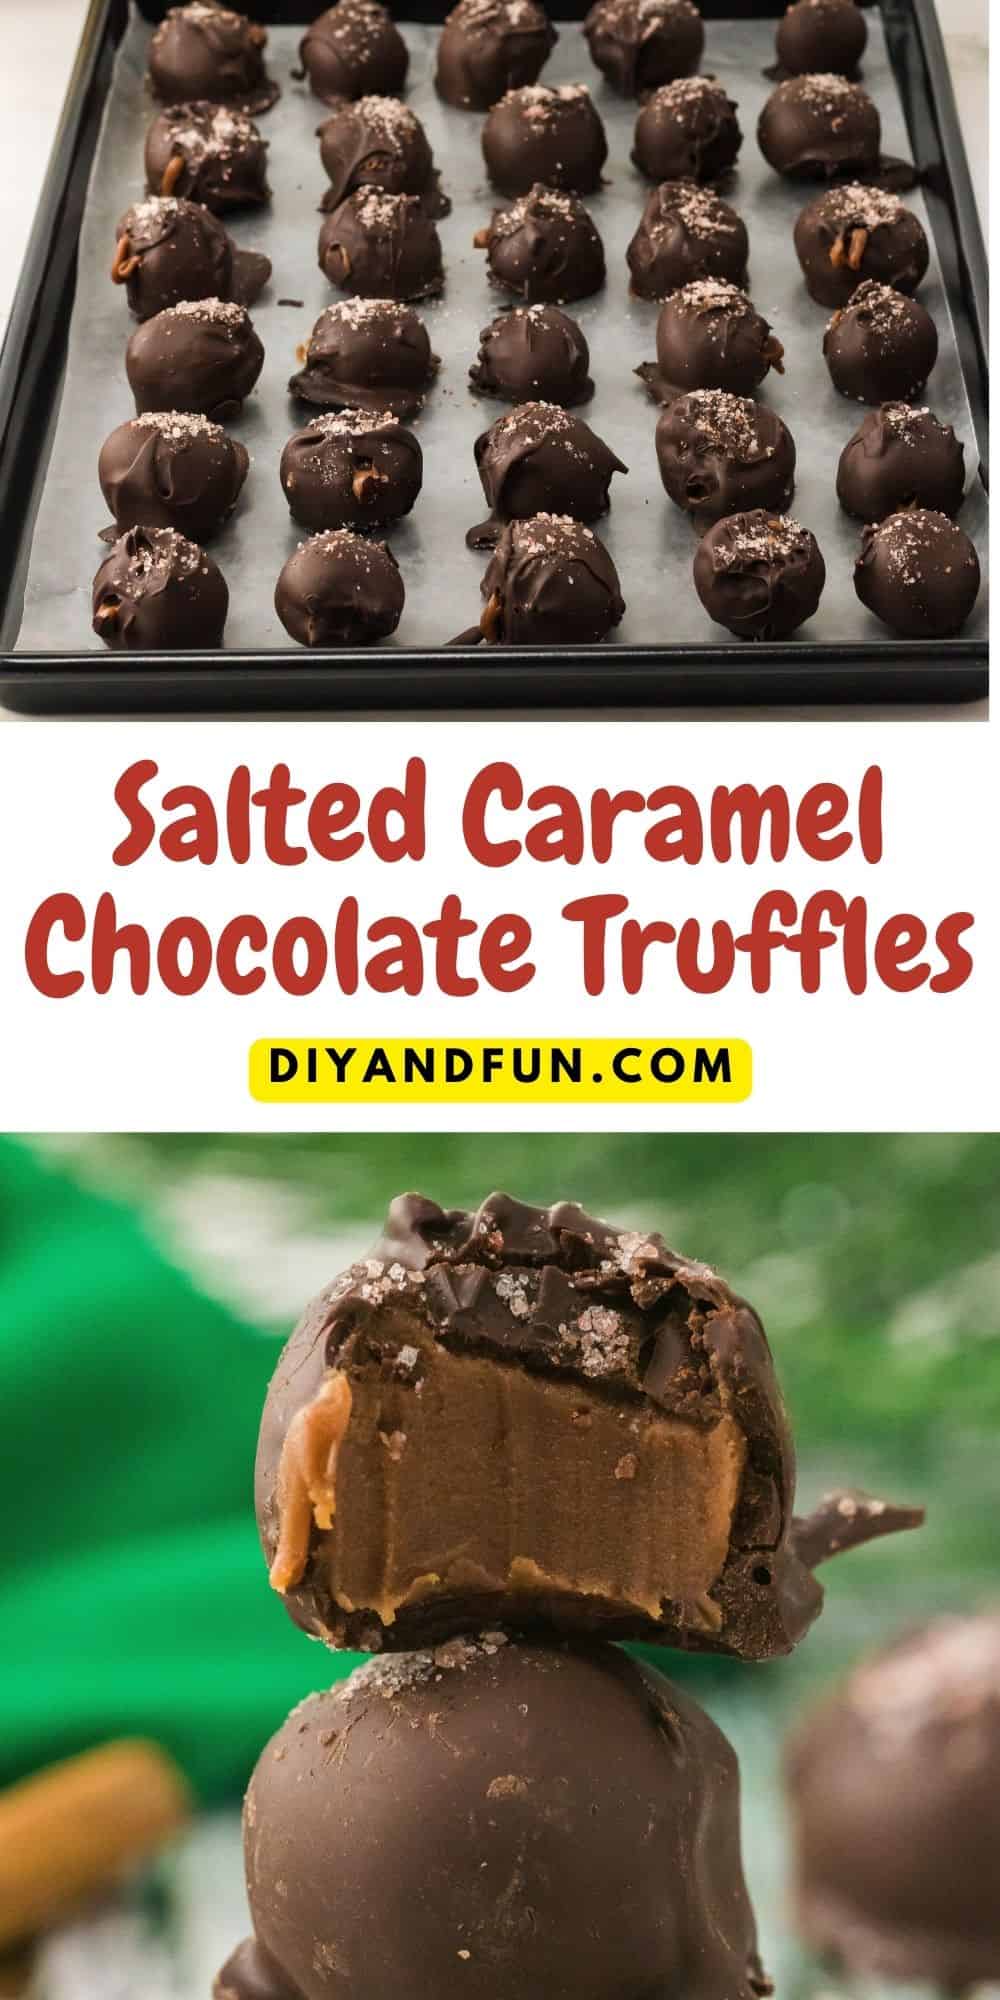 Salted Caramel Chocolate Truffles, a simple and delicious holiday dessert or snack treat candy recipe made in 20 minutes.